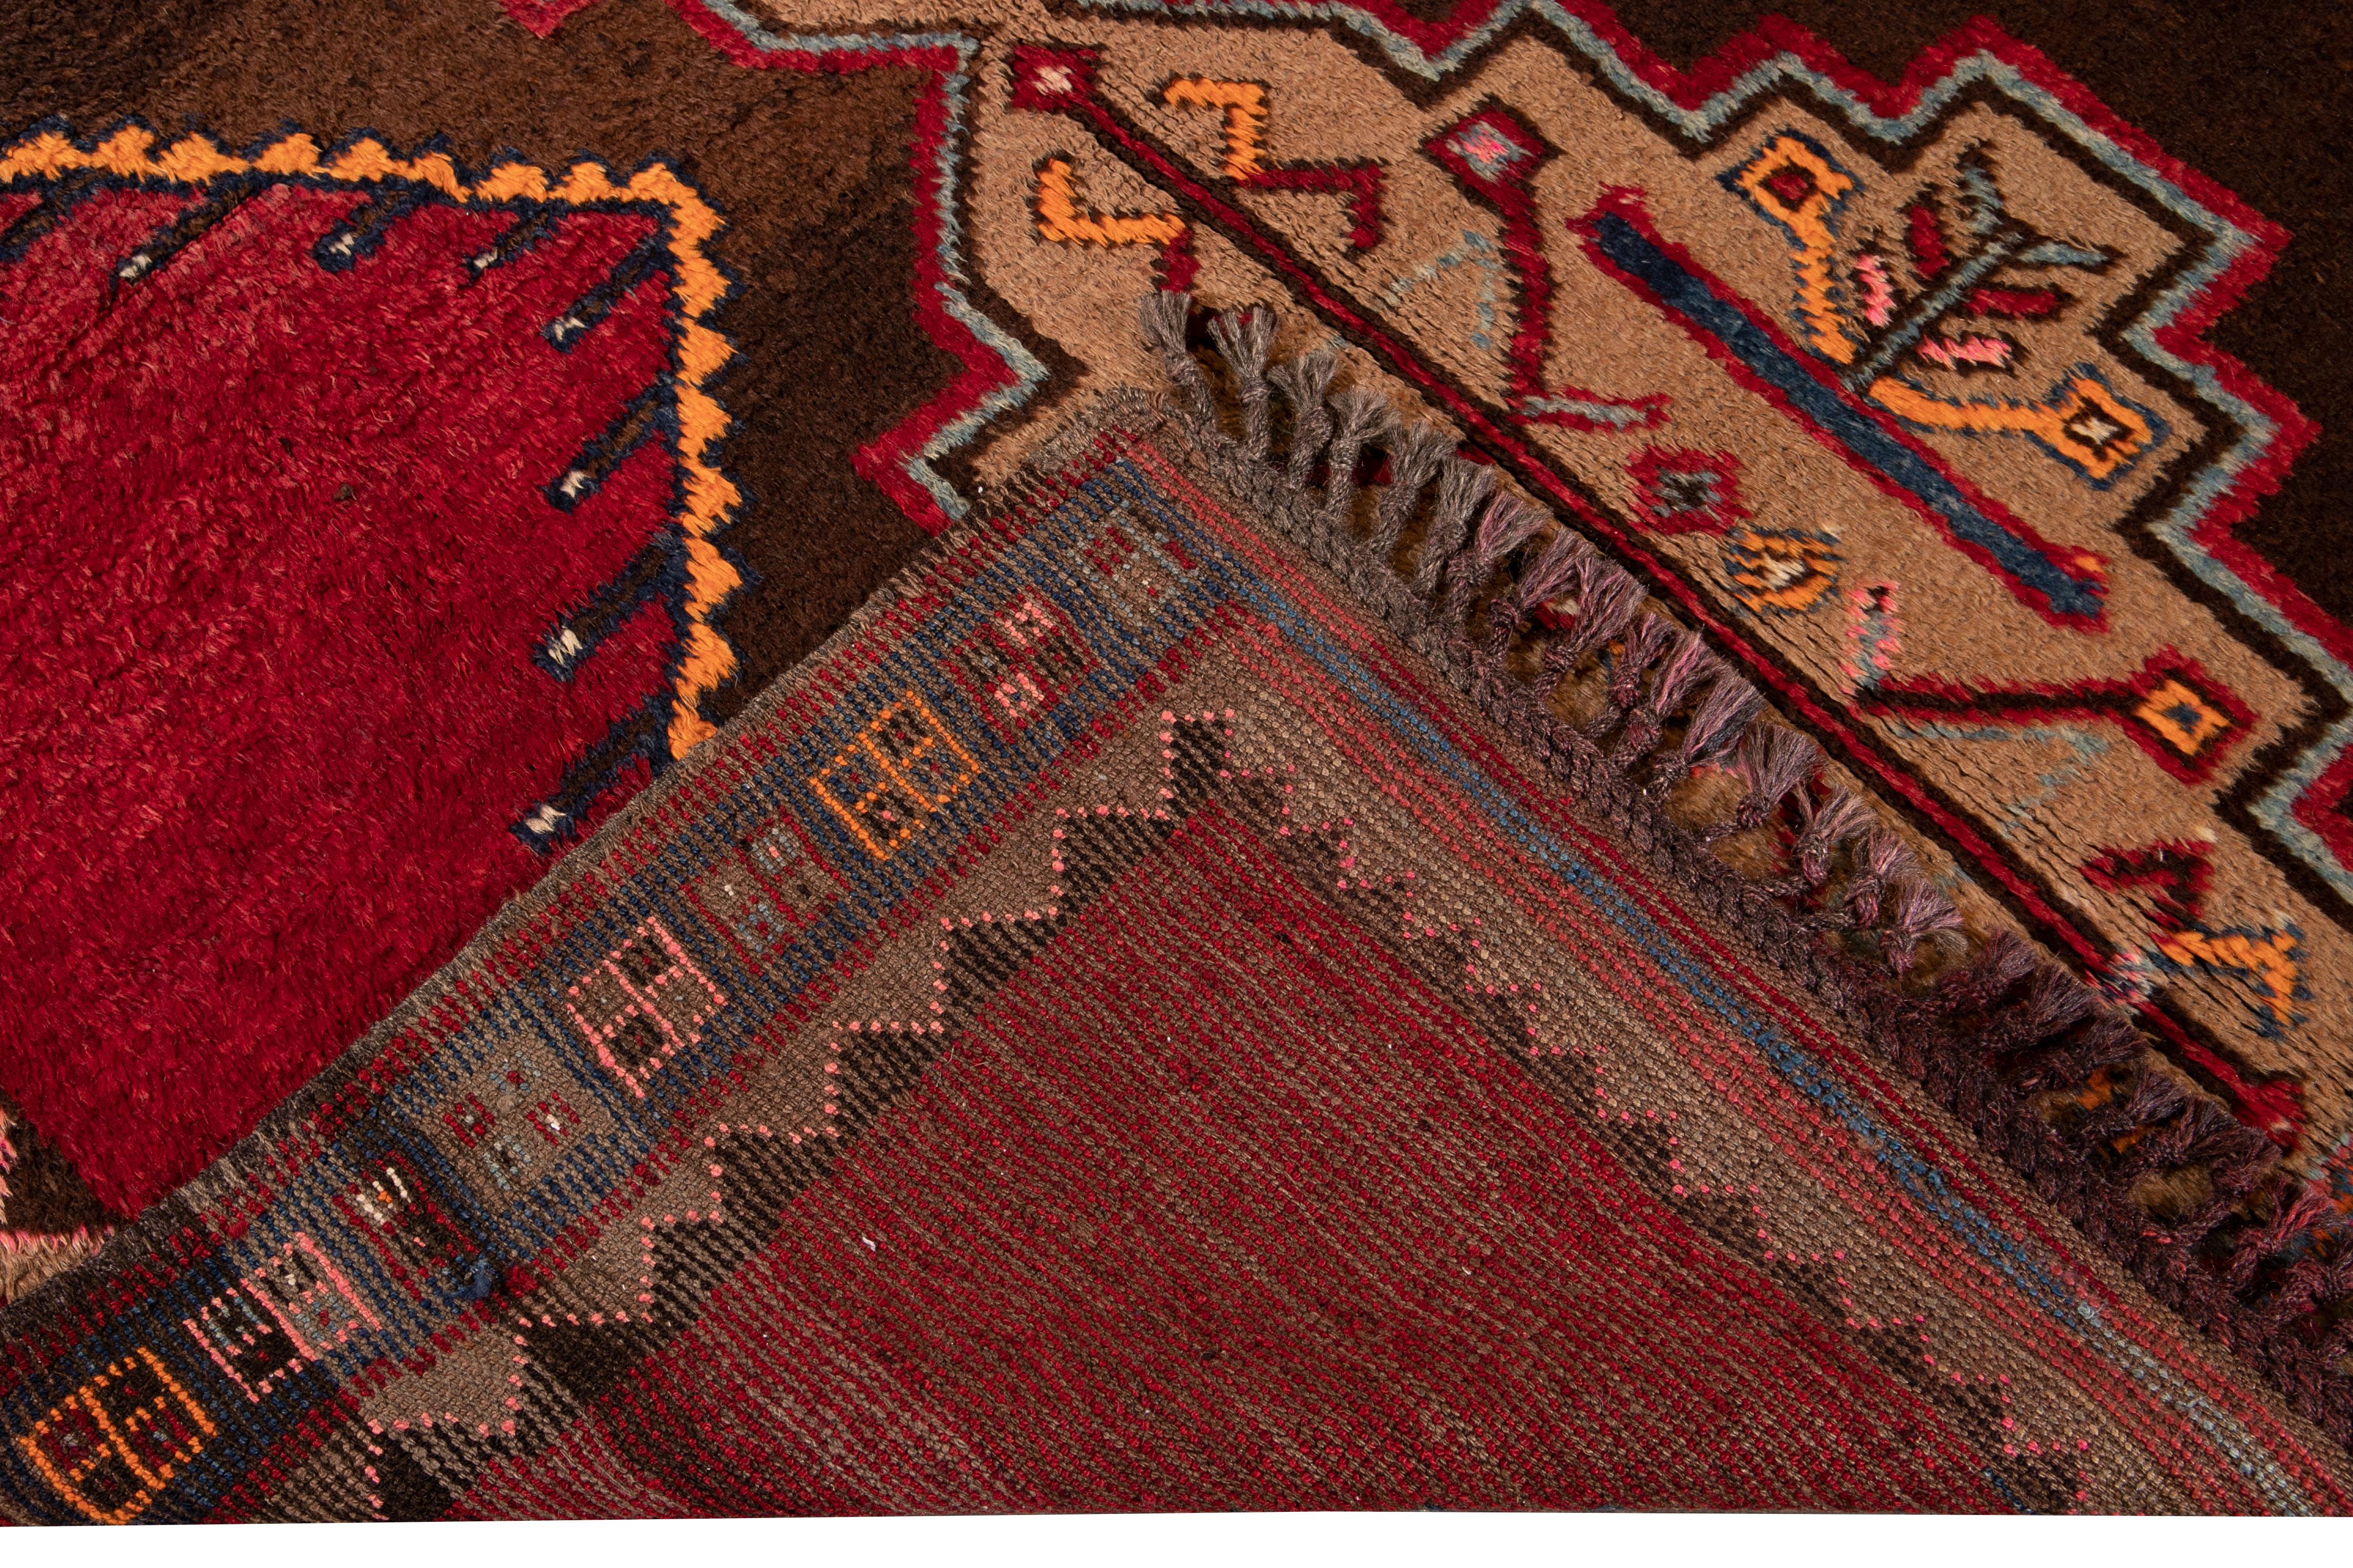 Beautiful vintage Turkish hand knotted wool rug with a red and orange field. This Turkish rug has a brown frame and multi-color gorgeous all-over geometric Tribal design.

This rug measures: 6' x 9'3